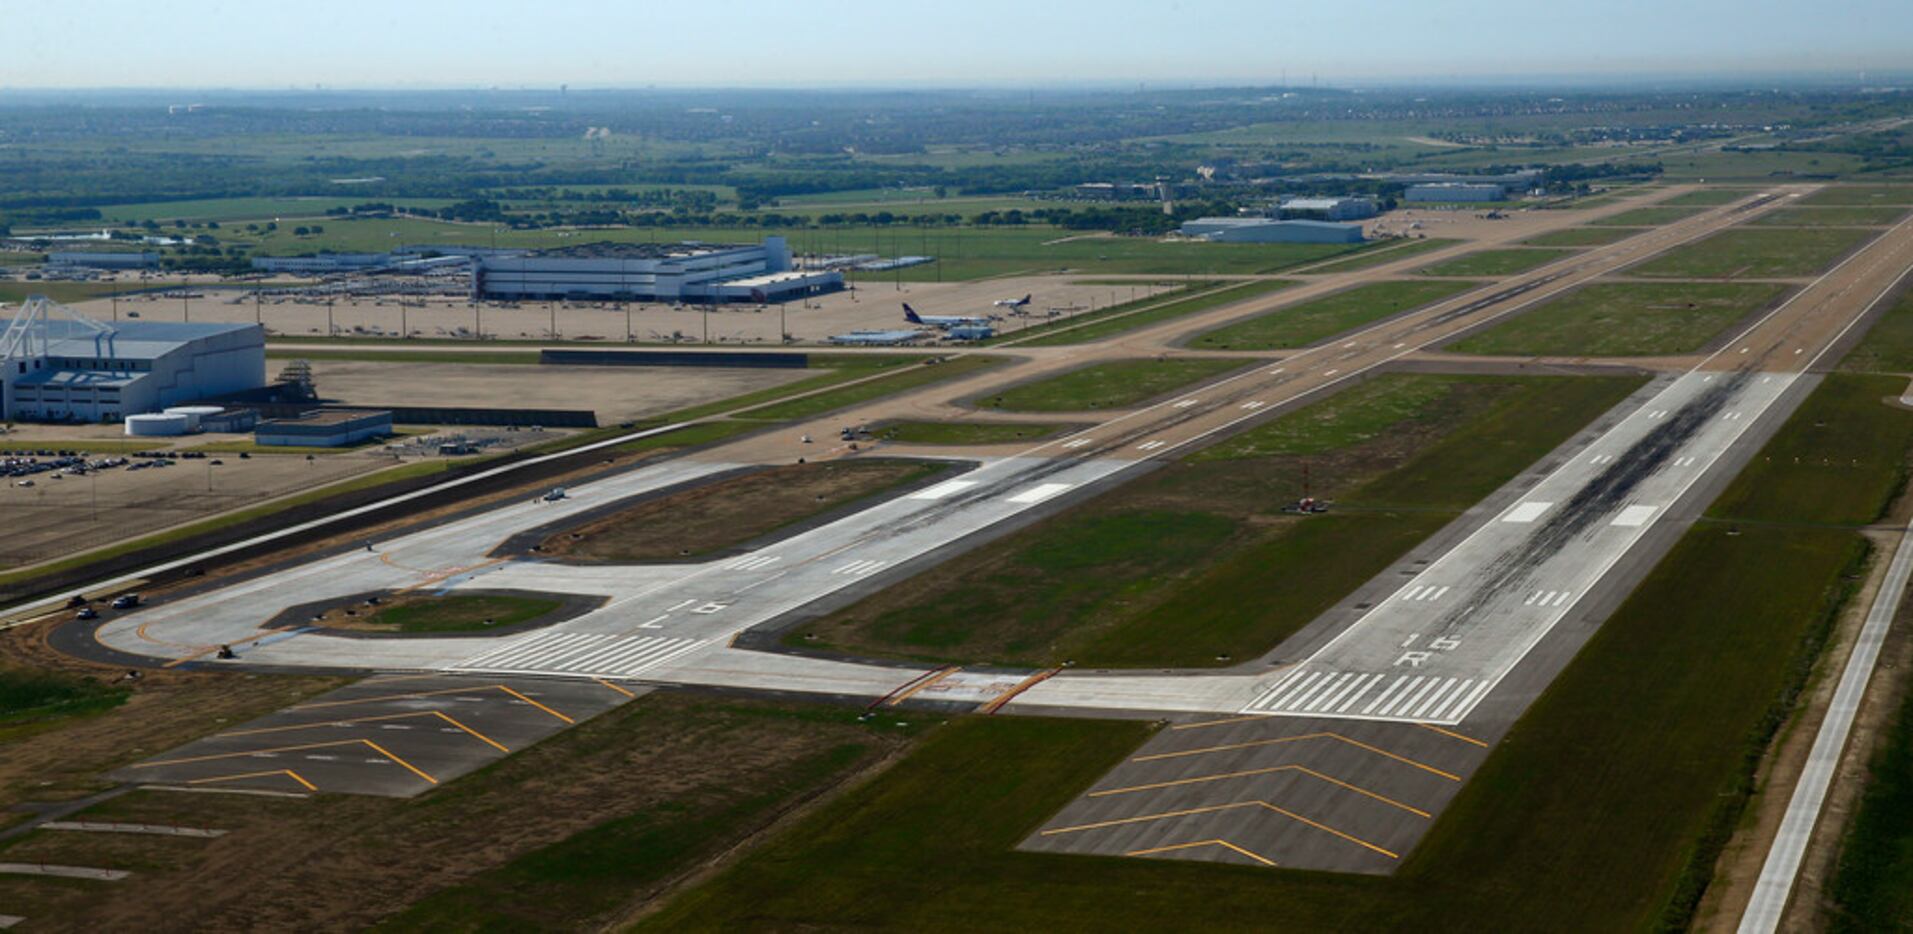 The extension of the main runway at Fort Worth's Alliance Airport brings it to 11,000 feet....